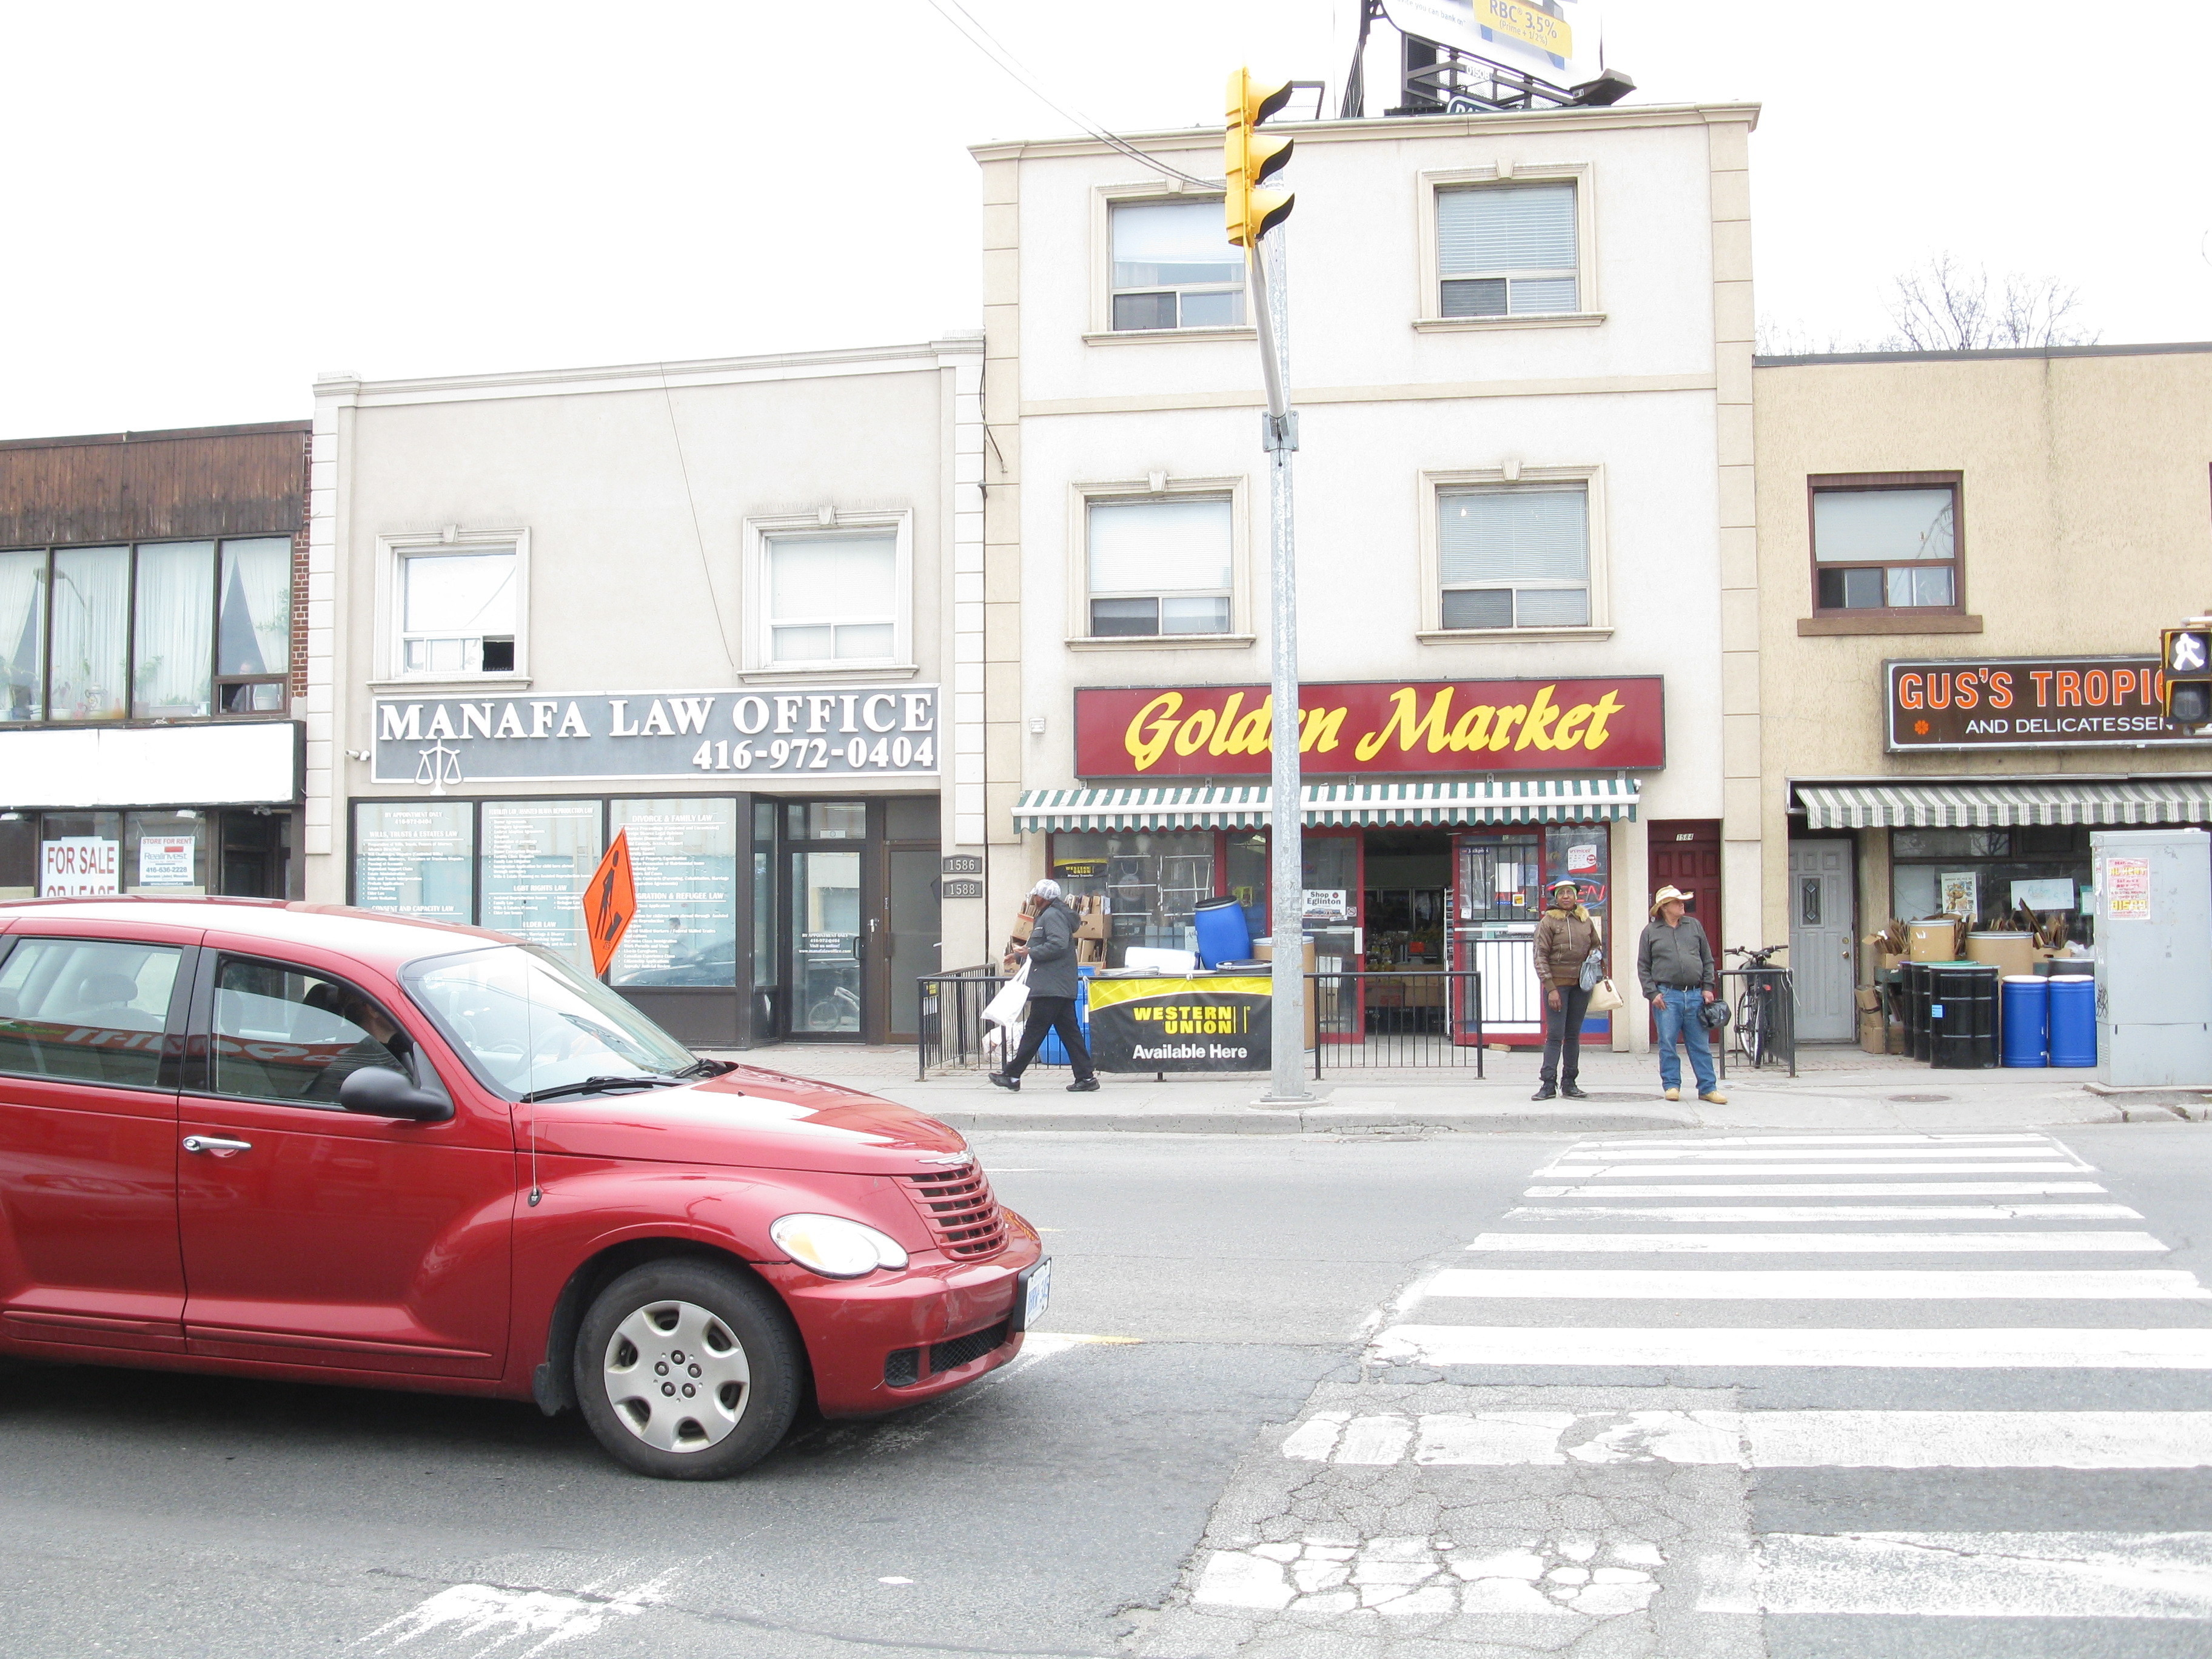 Intersection of oakwood and eglinton, 2013 04 09 -an photo